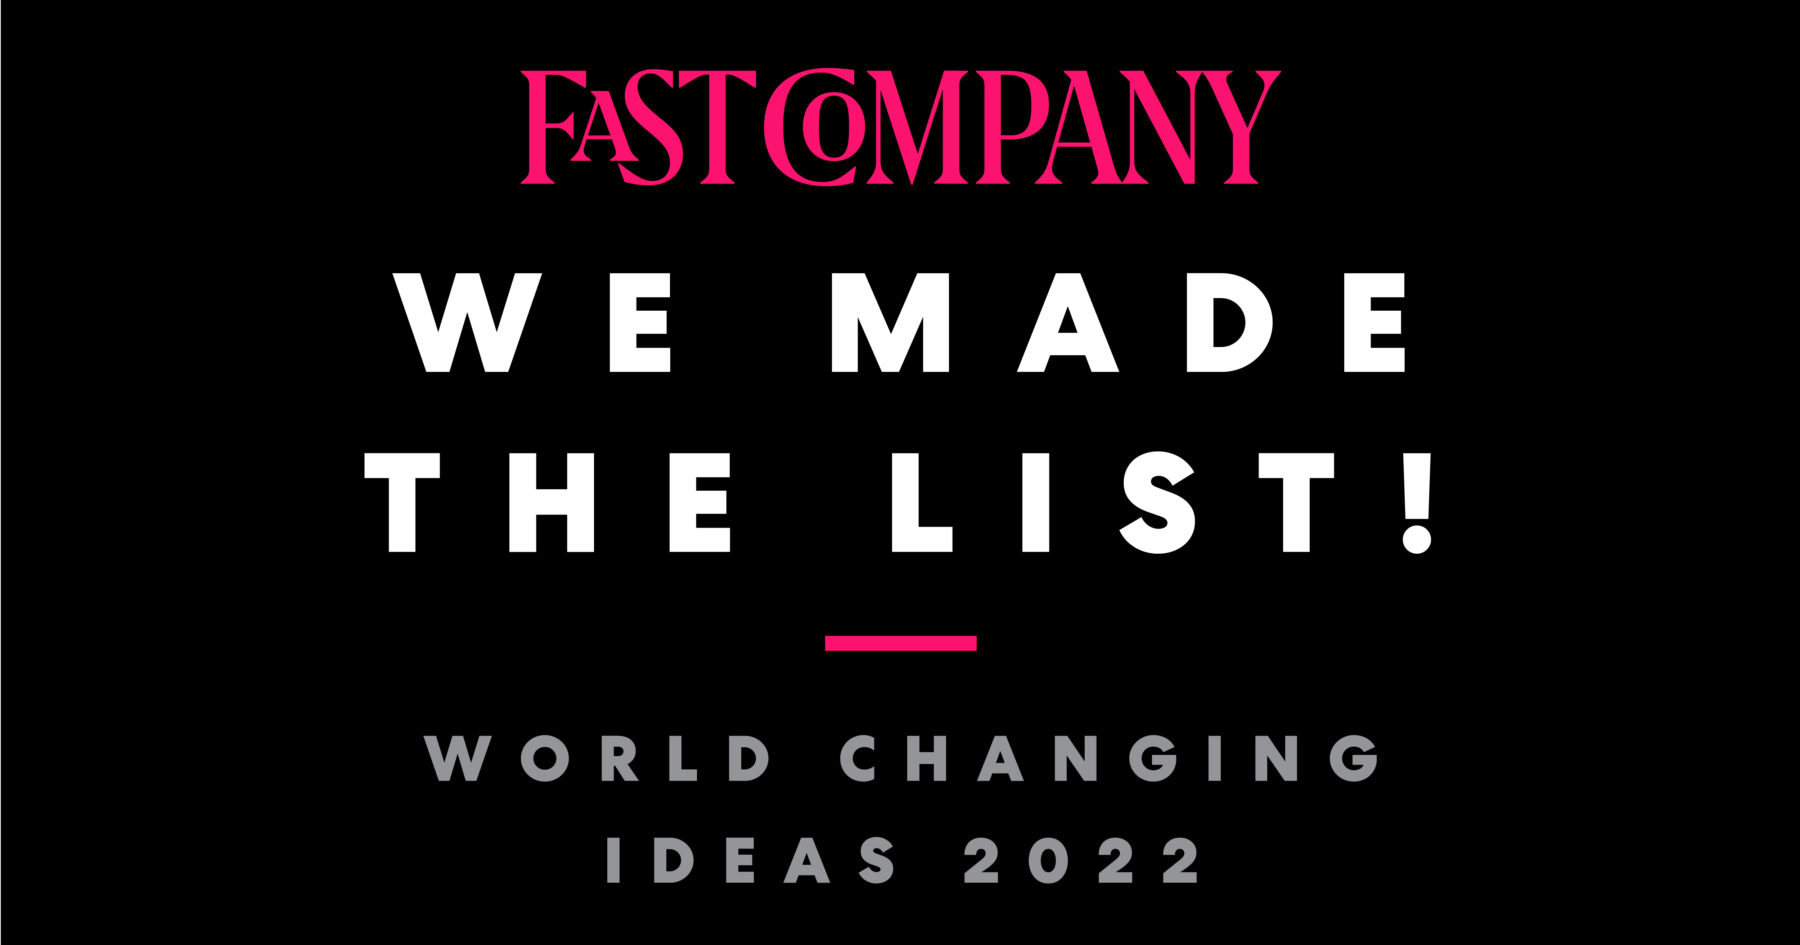 image with white and pink text on a black background that shows the Fast Company logo, says 